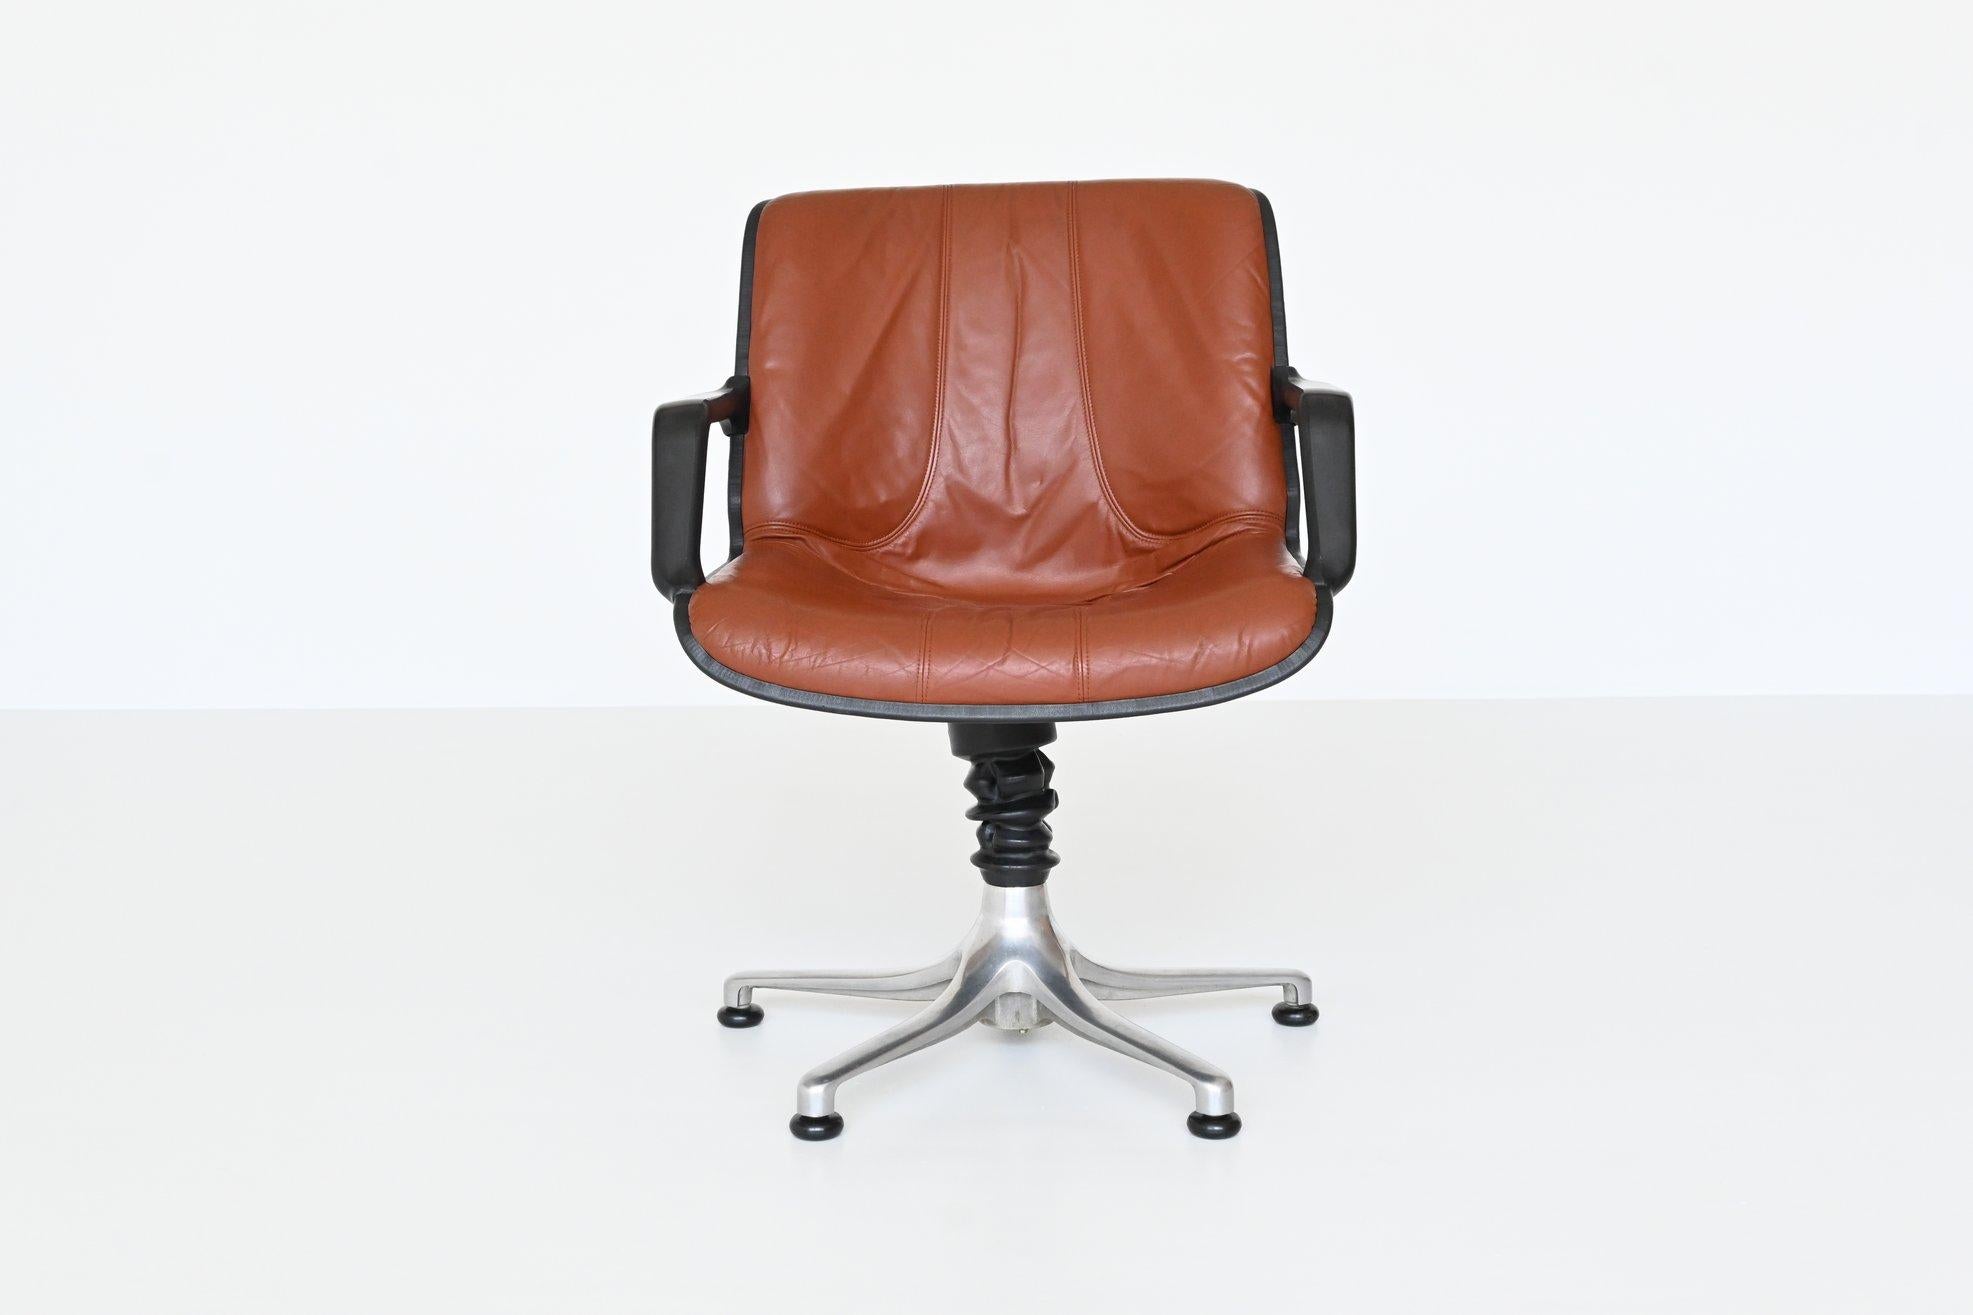 Beautiful and very comfortable office or desk chair model Chefsessel designed by Burkhardt Vogtherr and manufactured by August Fröscher, Germany 1970. This office chair has an aluminium star shaped base and the shell is made of black plastic. It has